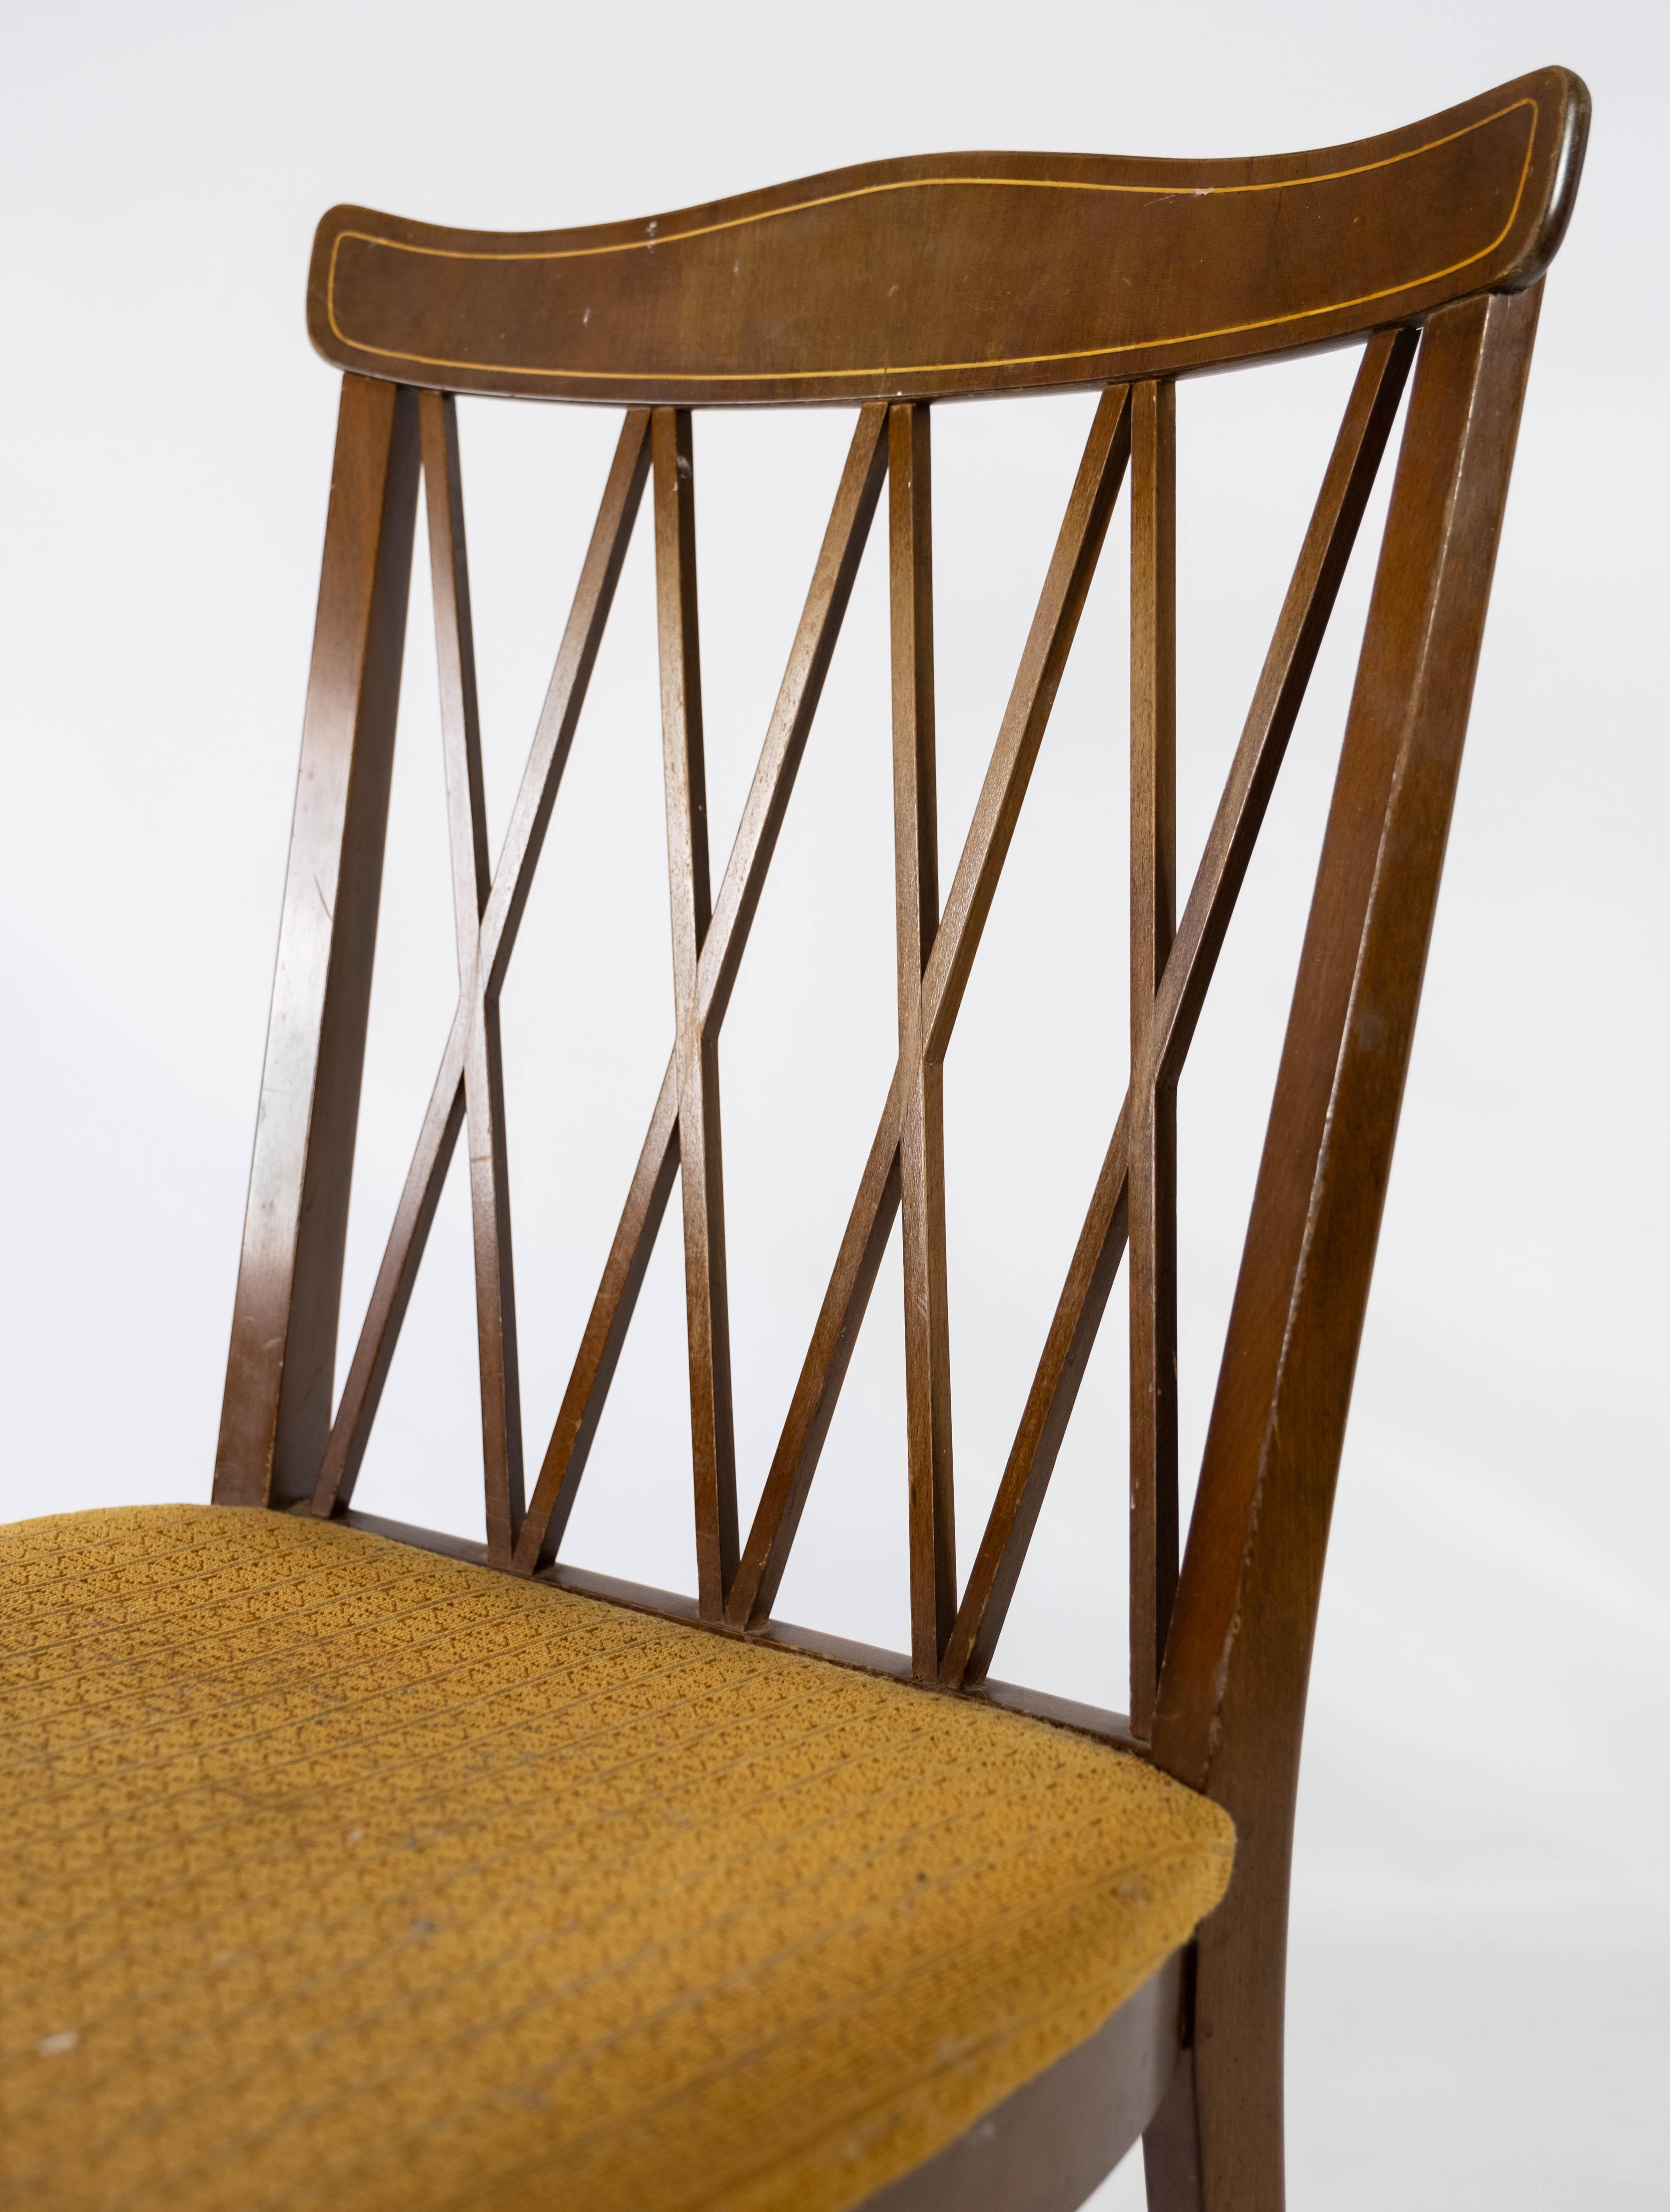 Mid-20th Century Set of Dining Room Chairs of Walnut and Upholstered with Dark Fabric, 1940s For Sale